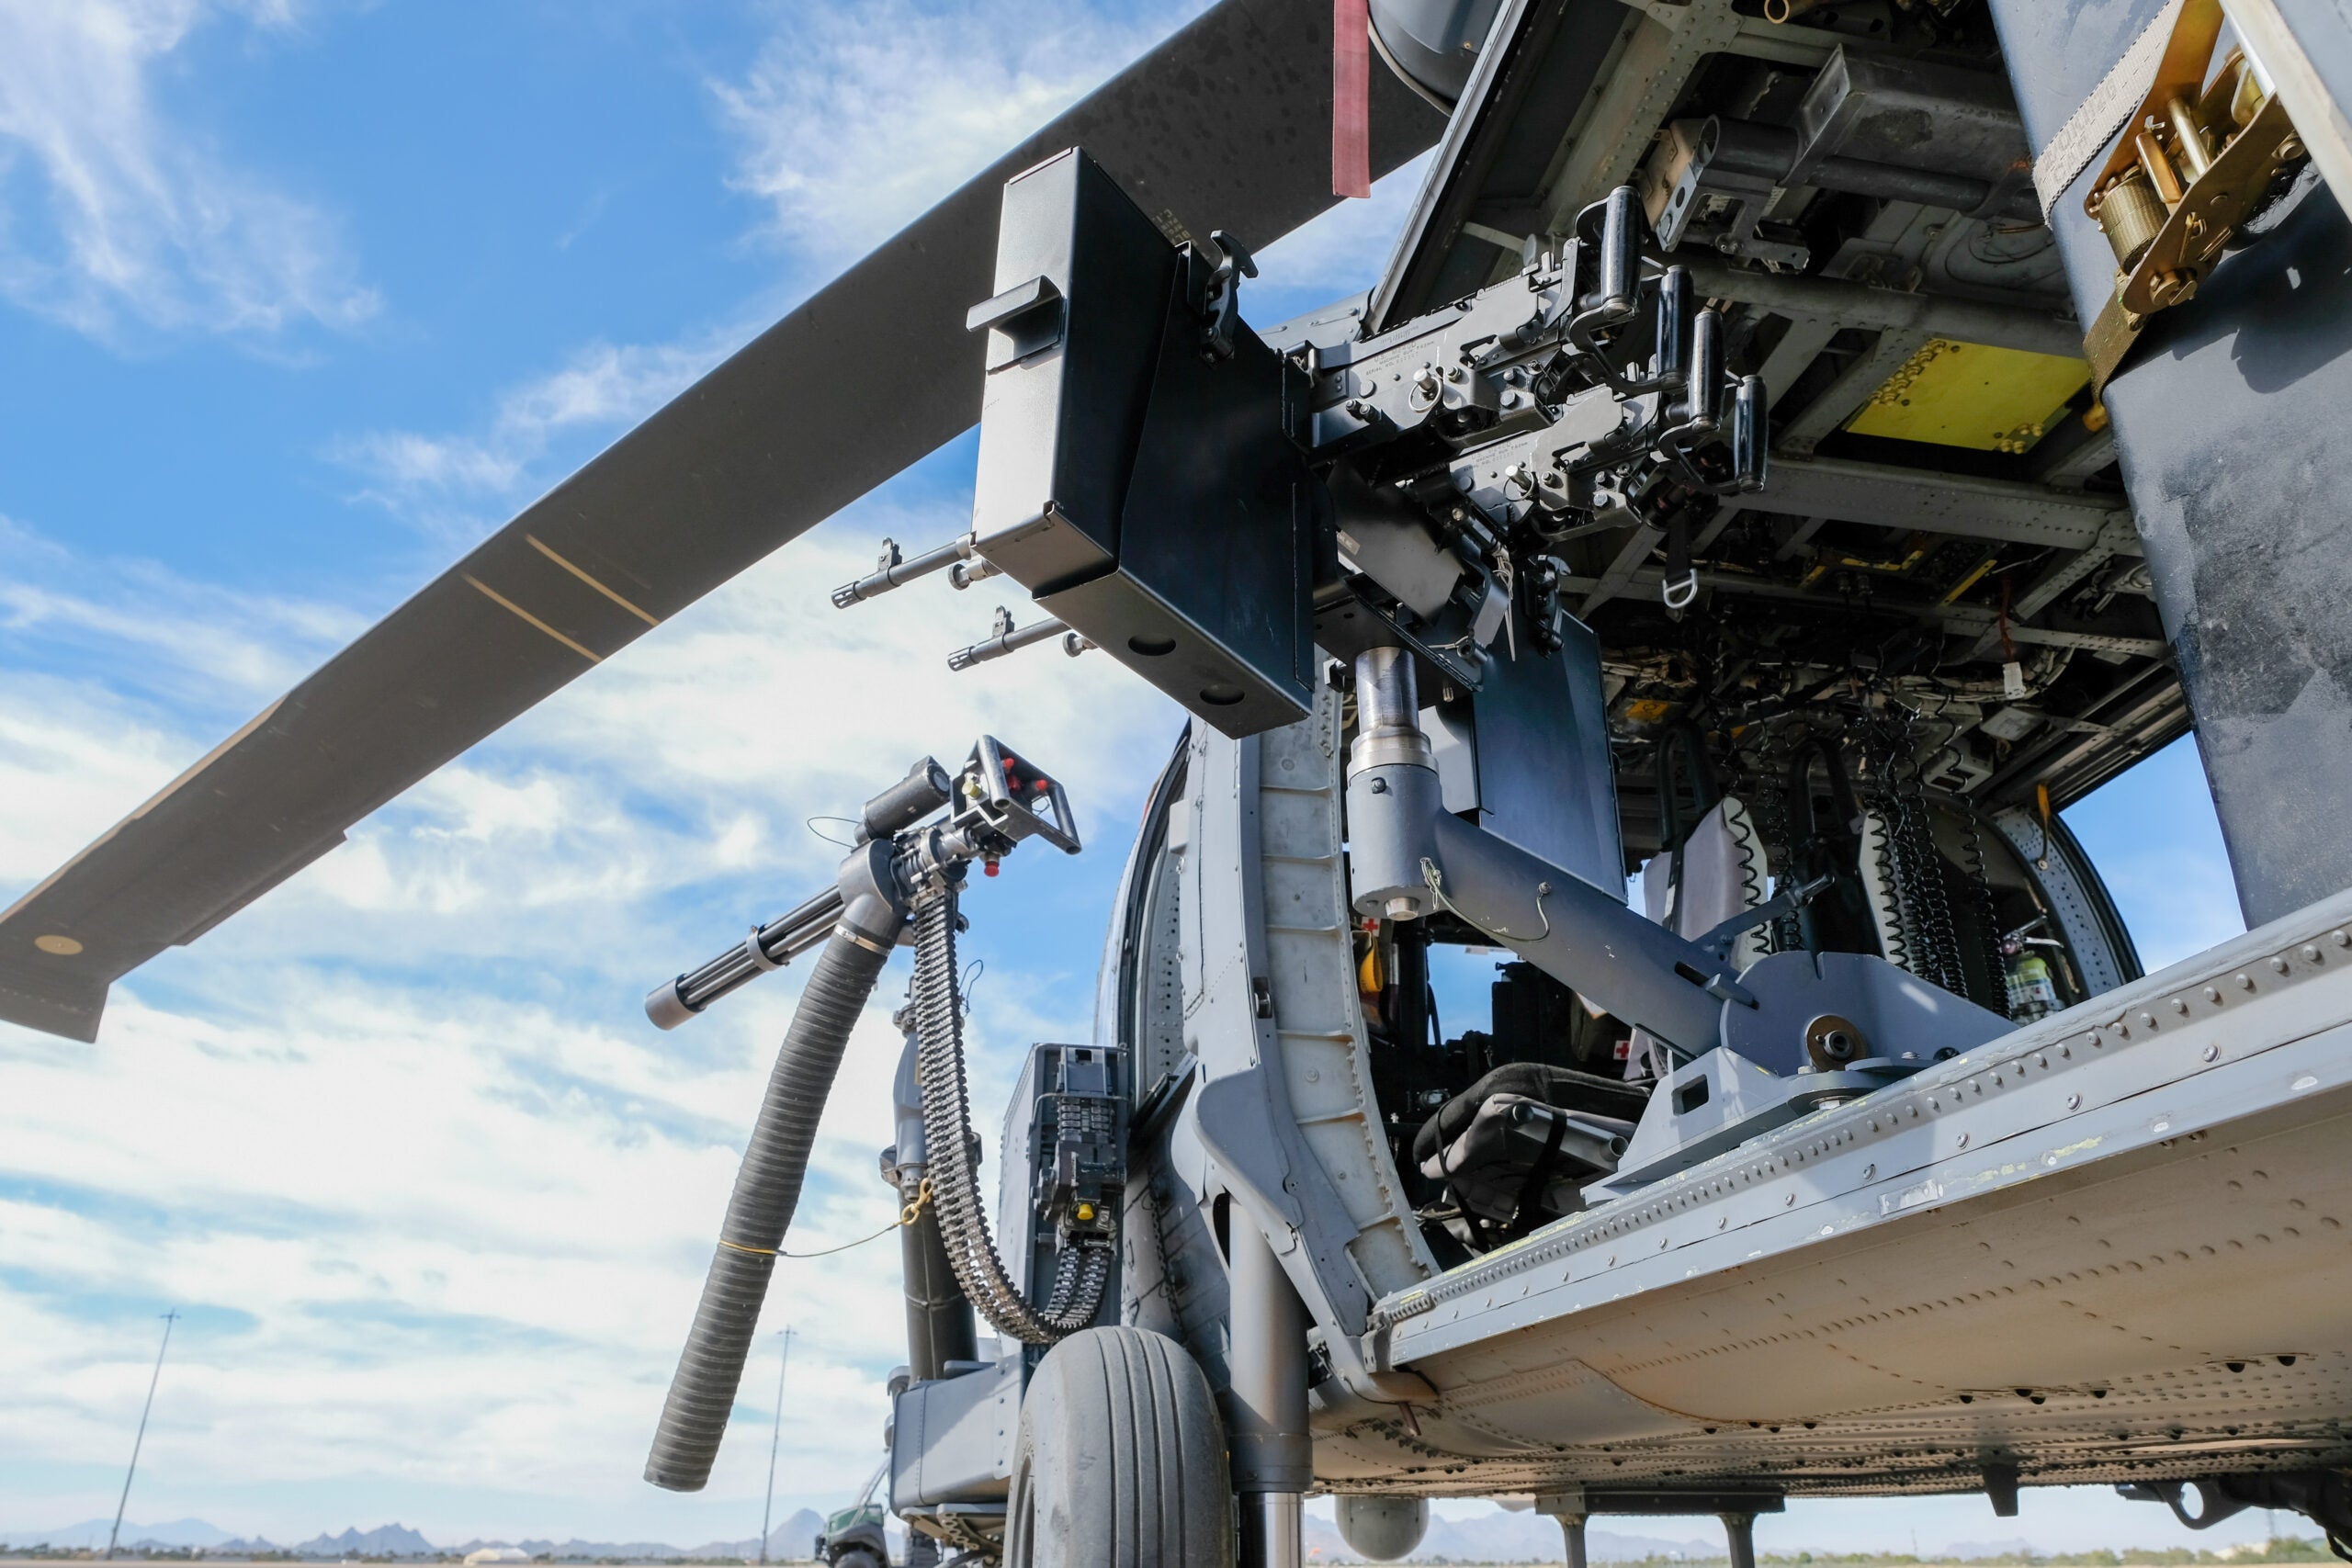 943d Rescue Group Airmen mount two M240s into an HH-60G Pave Hawk helicopter Nov. 22, 2022, at Davis-Monthan Air Force Base, Arizona. The 943d Rescue Group designed a concept to mount four additional M240 machine guns onto the HH-60G helicopters to provide more firepower to the 920th Rescue Wing’s personnel recovery task force in contested environments. (U.S. Air Force photo by Andre Trinidad)